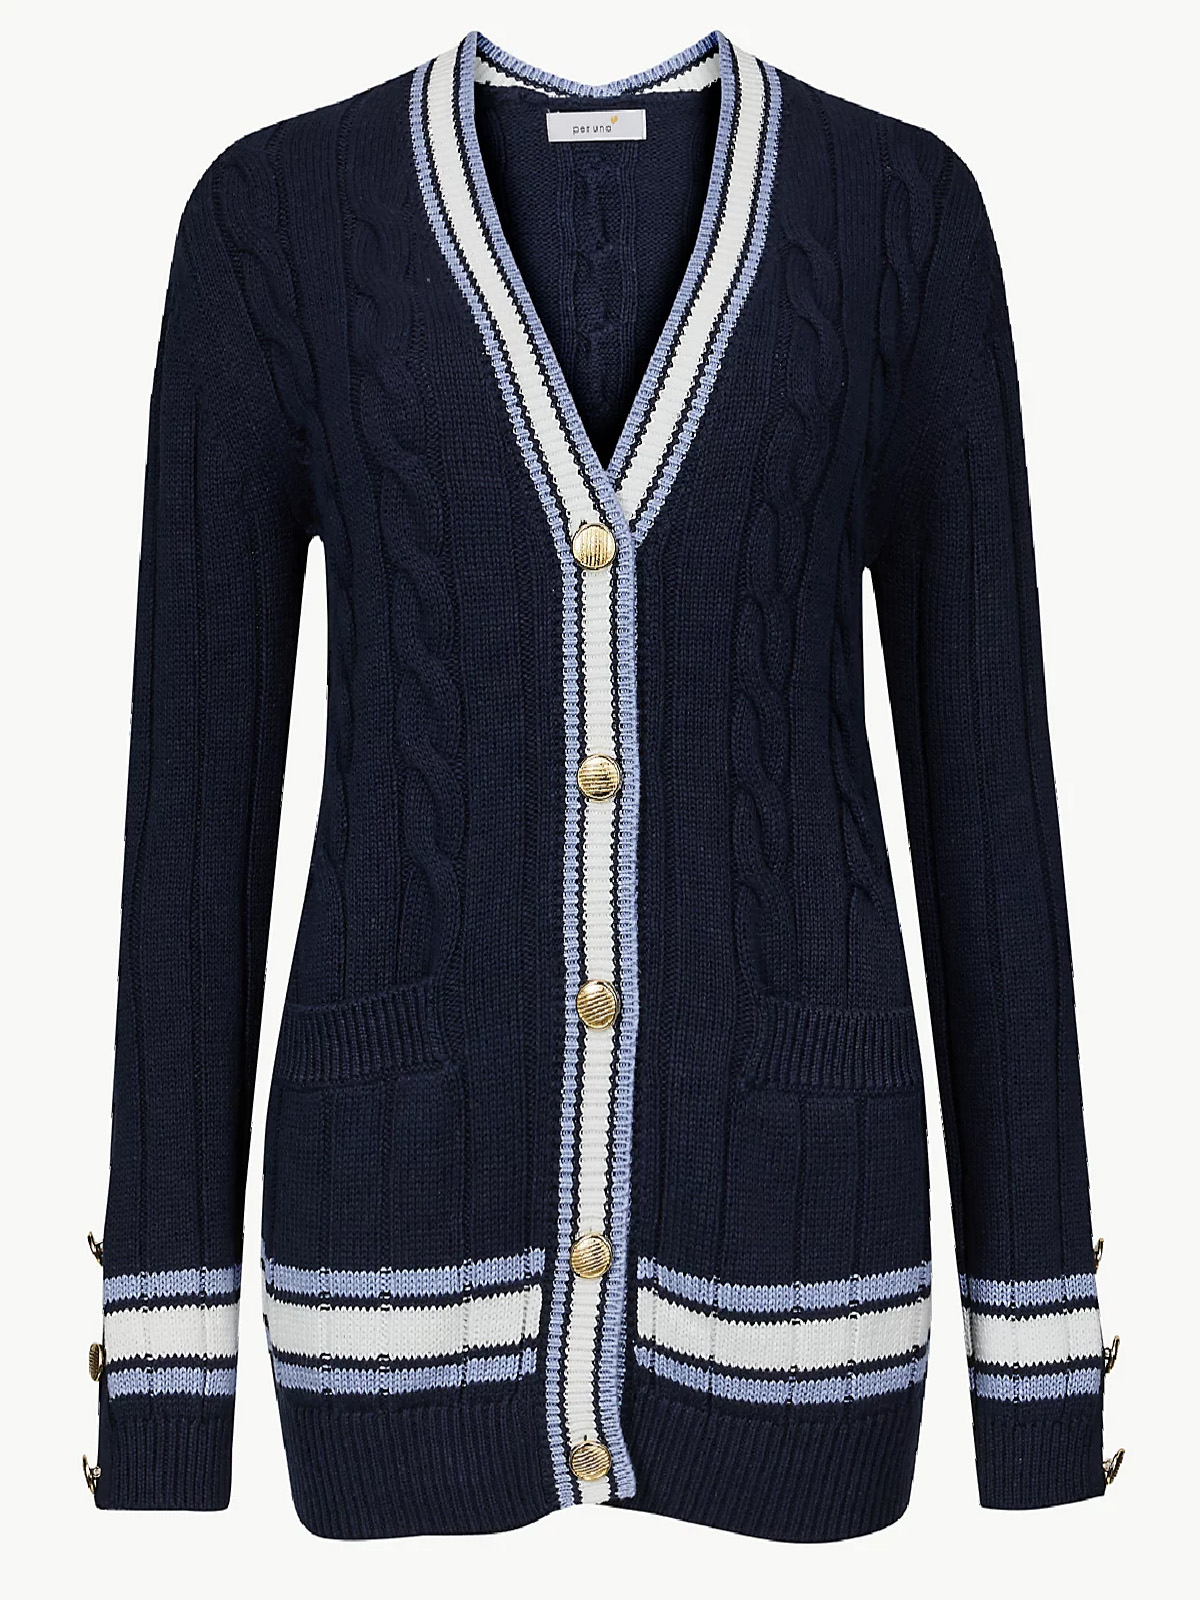 Marks and Spencer - - M&5 NAVY Pure Cotton Textured Cardigan - Size 12/ ...